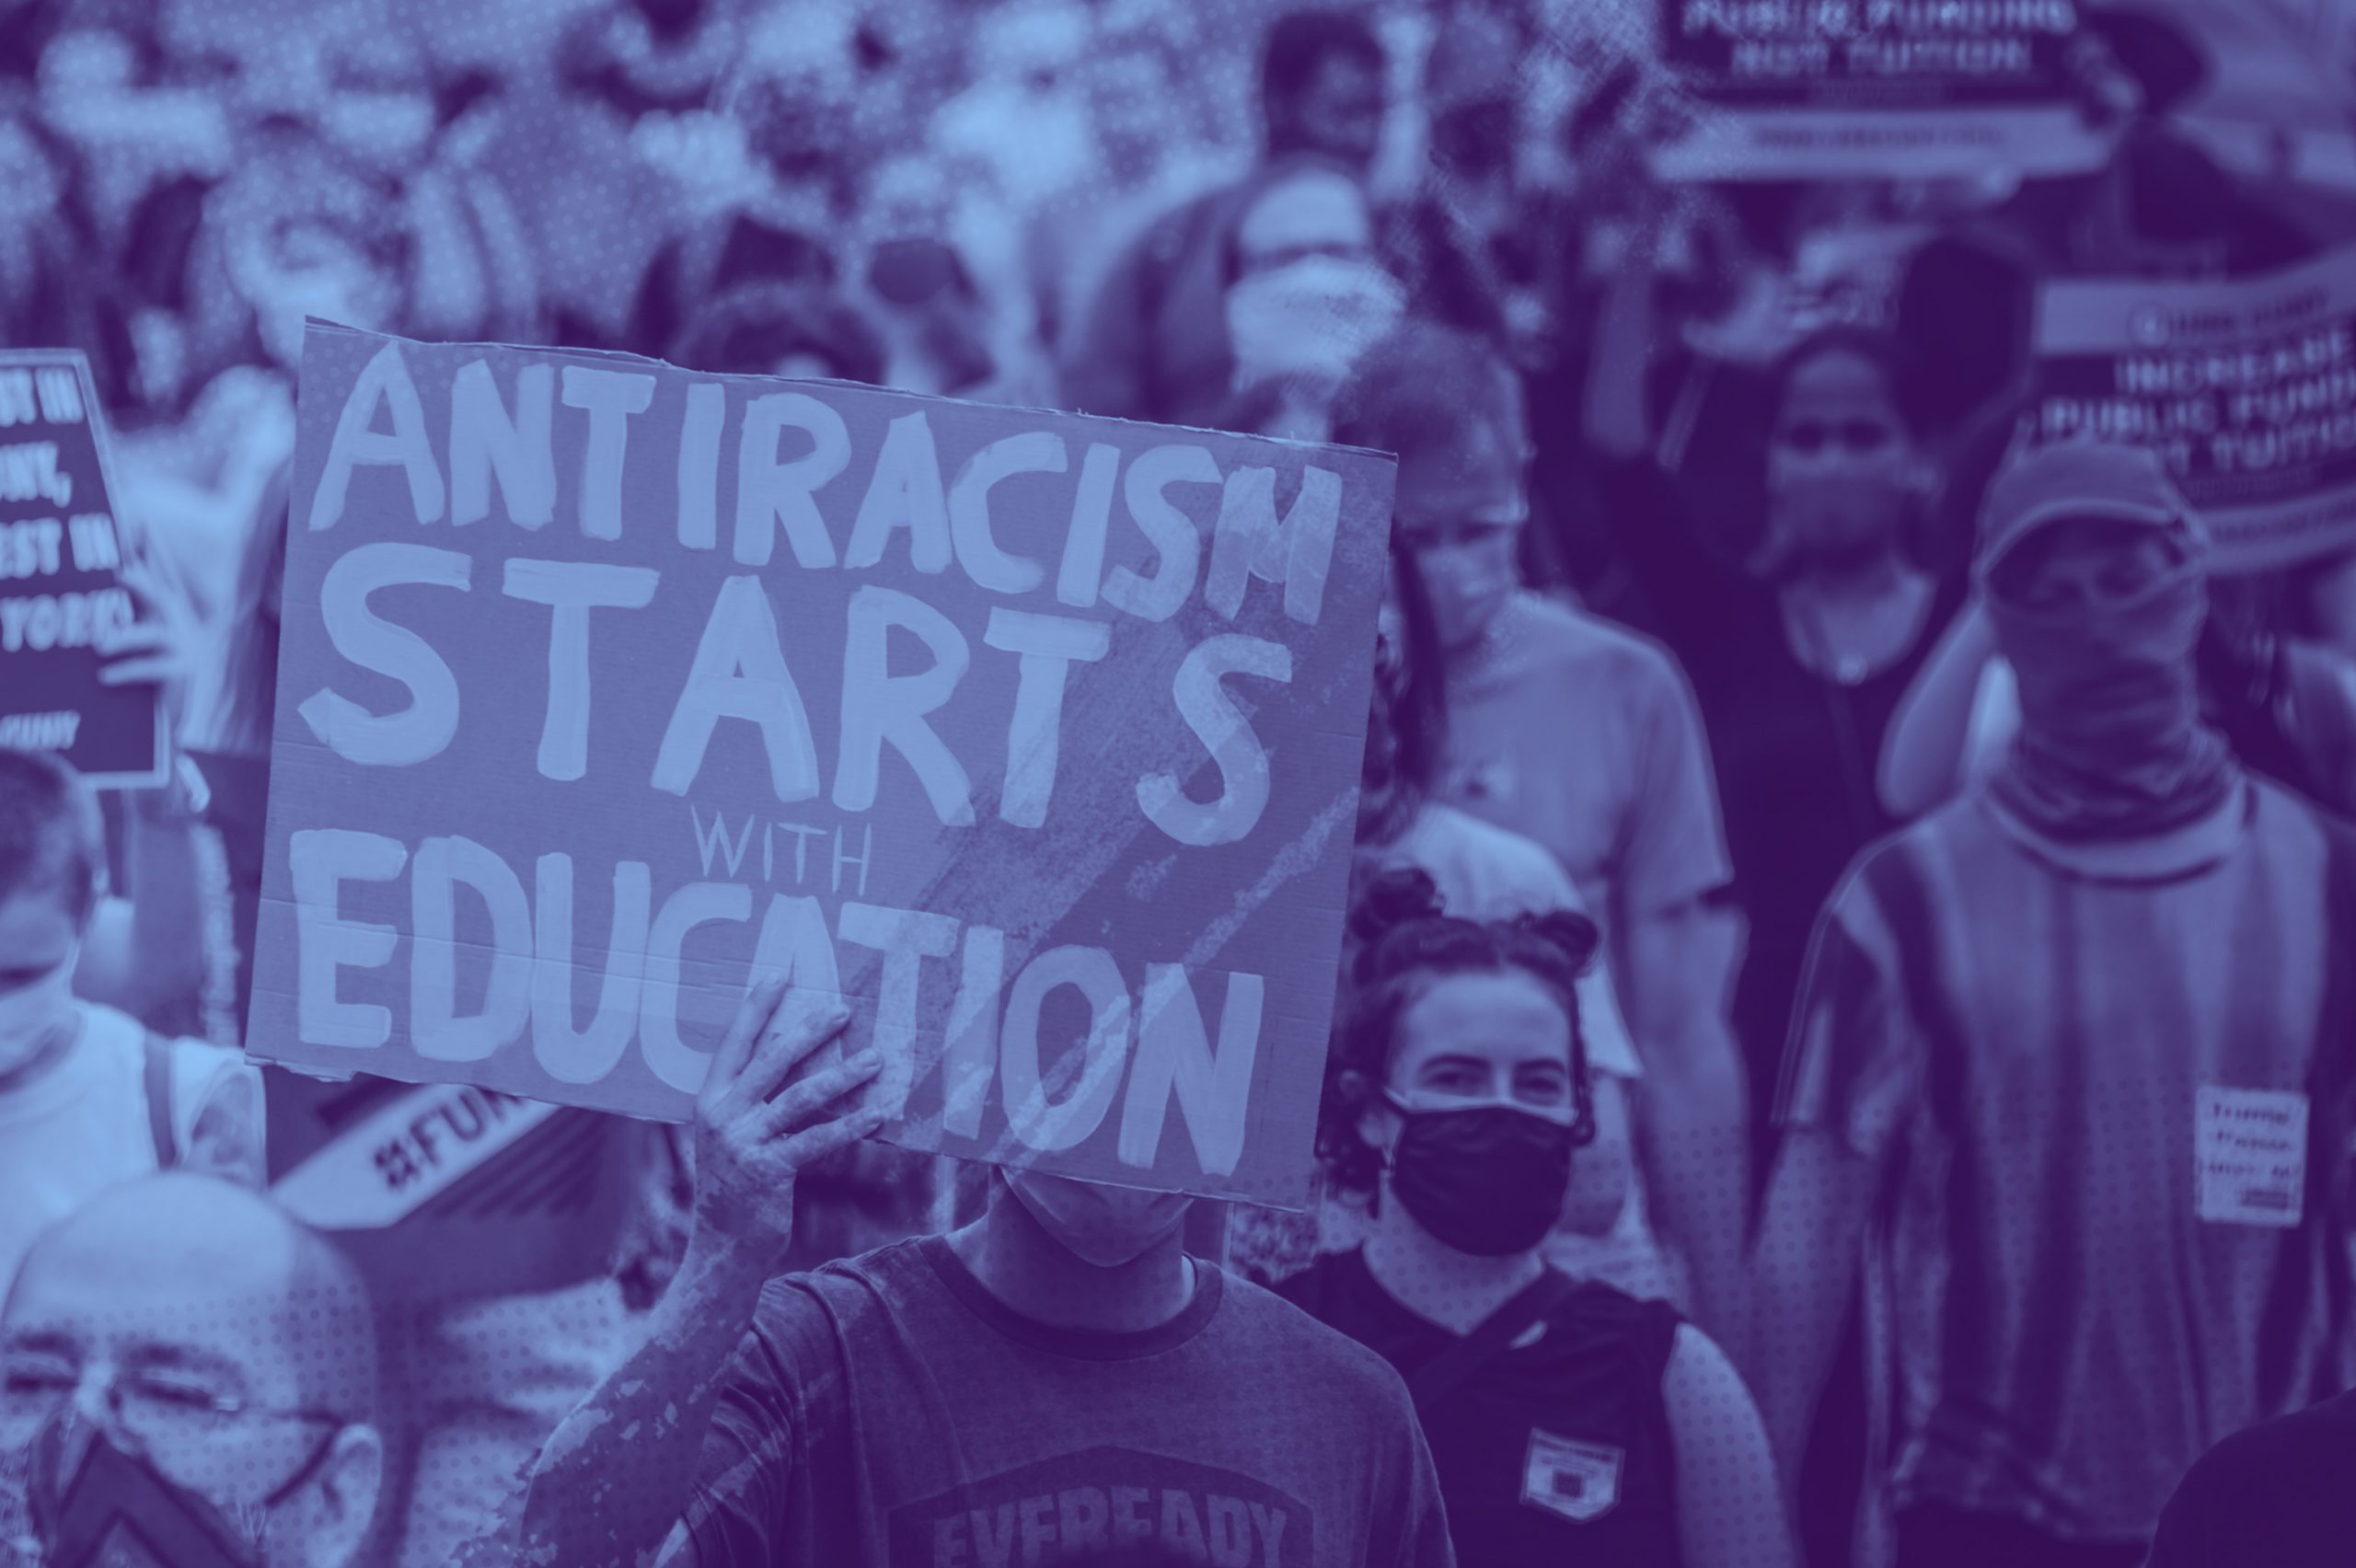 A crowd of people marching at a Black Lives Matter protest. A man holds a sign that says "Antiracism starts with education" at the front of the crowd.